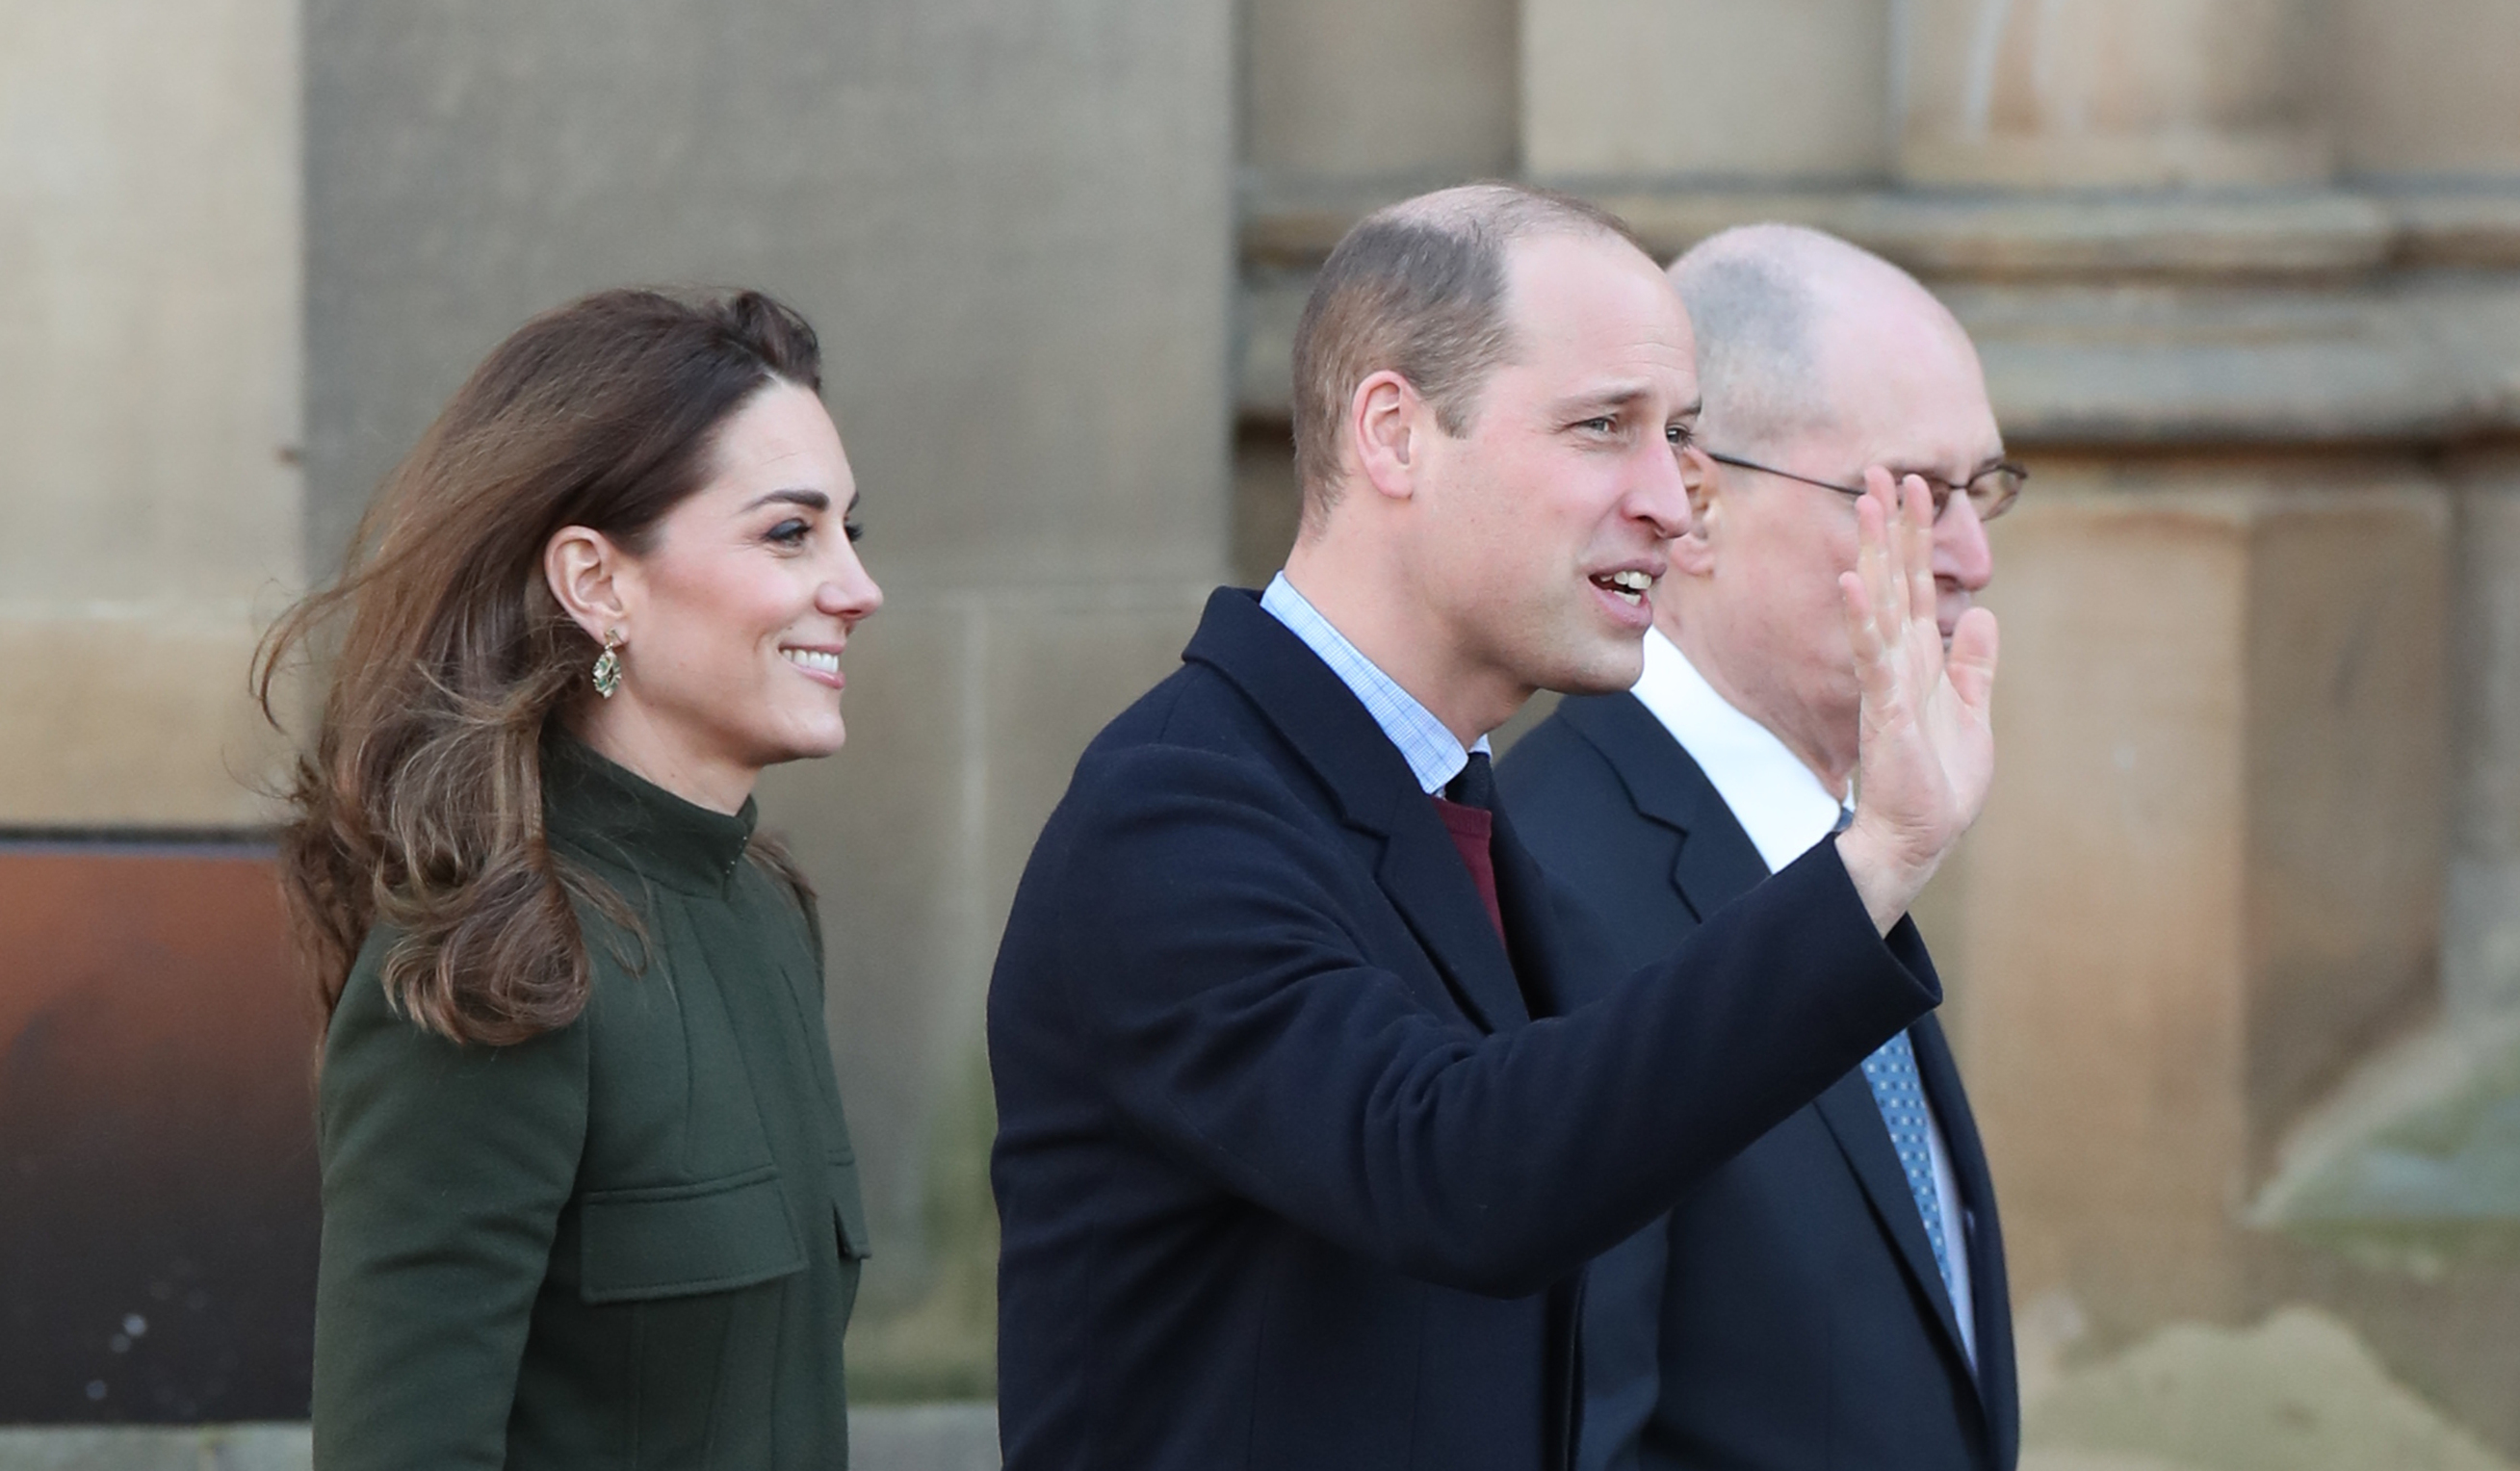 ALTERNATE CROP: The Duke and Duchess of Cambridge arrive for a visit to City Hall in Bradford to join a group of young people from across the community to hear about life in the city., Image: 492894815, License: Rights-managed, Restrictions: , Model Release: no, Credit line: Danny Lawson / PA Images / Profimedia